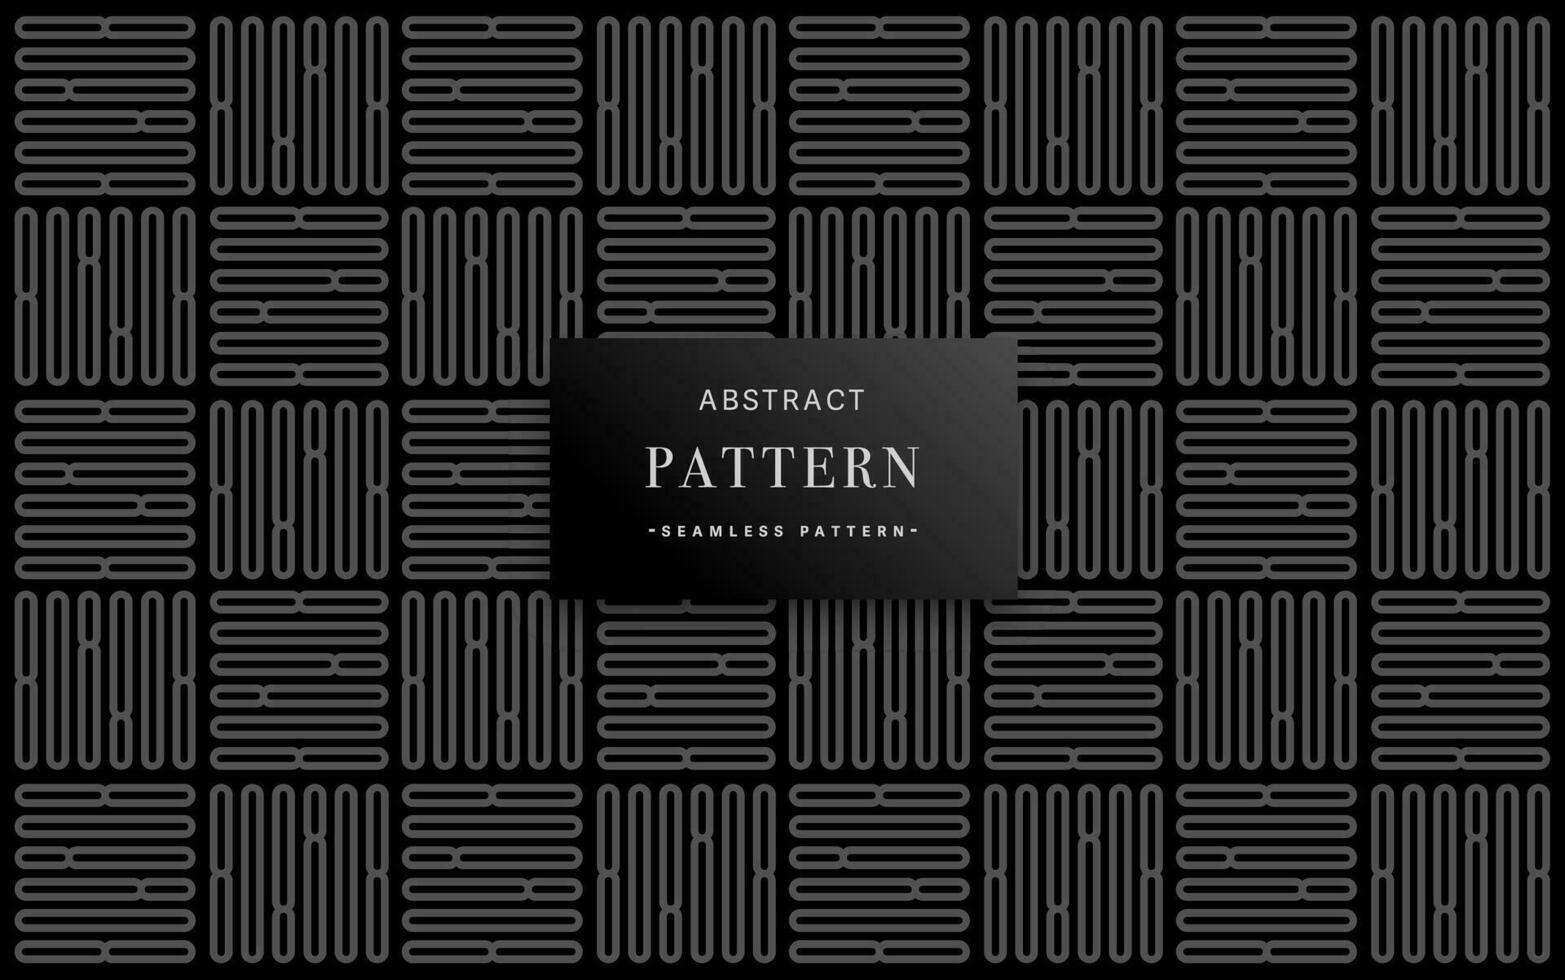 Abstract pattern with Numbers vector